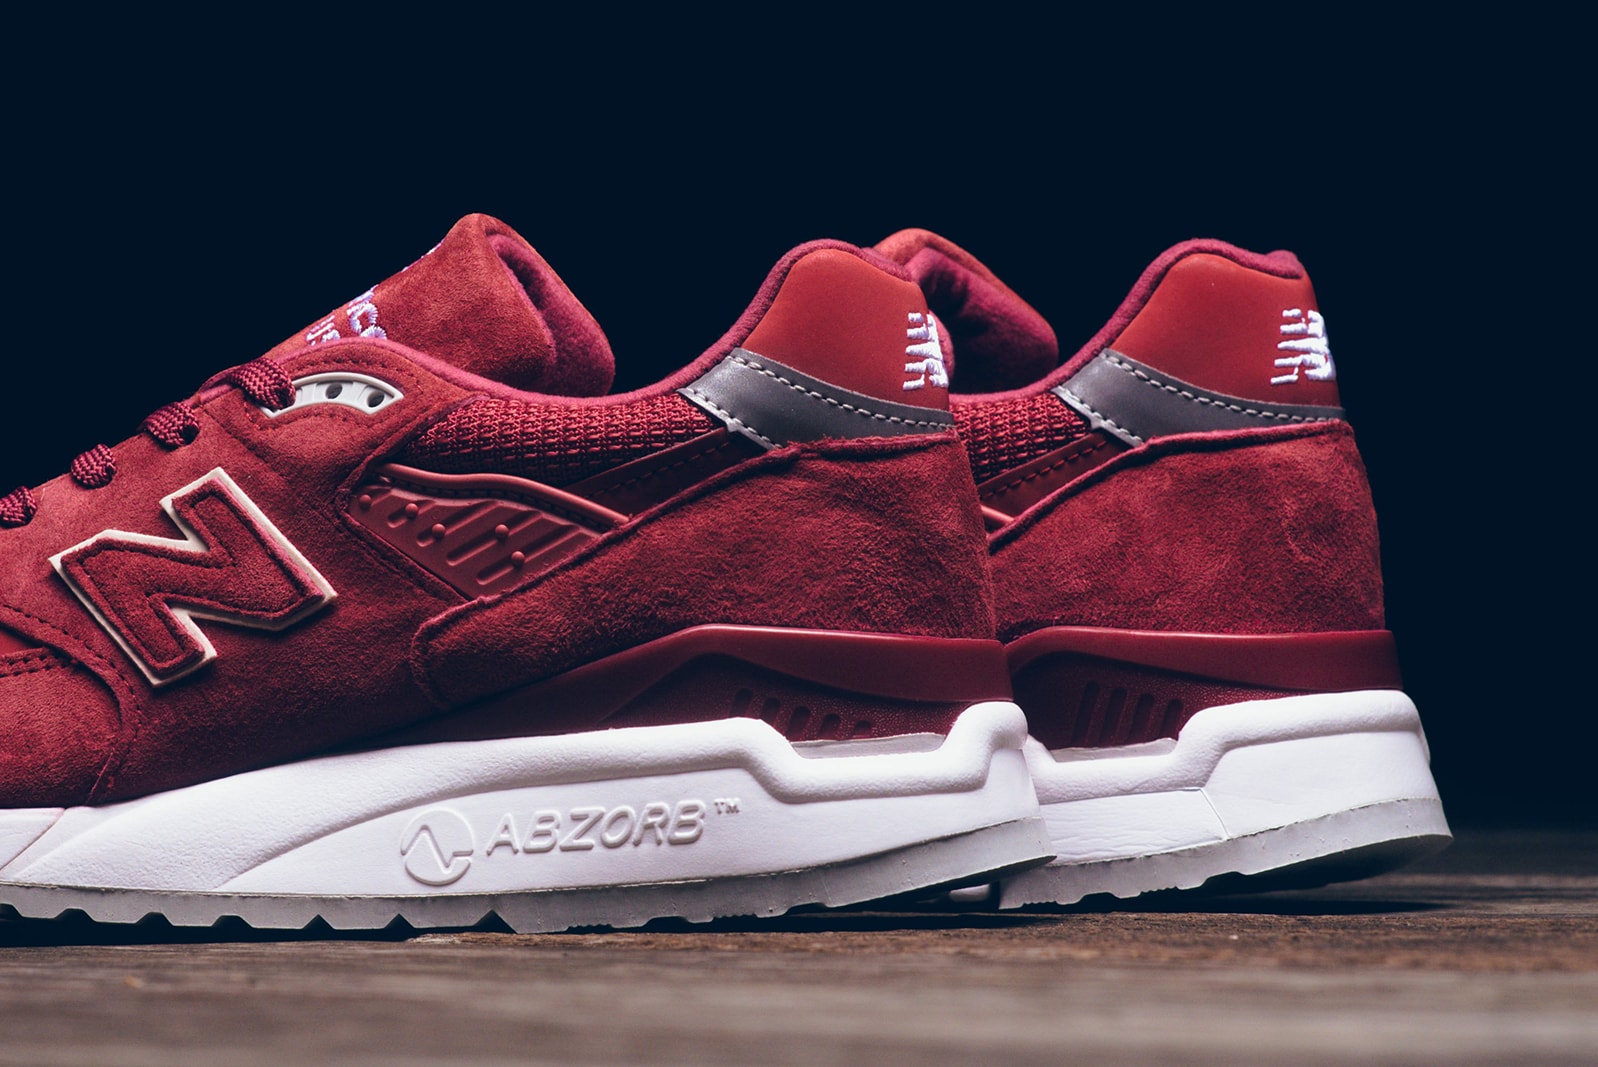 New Balance 998 RBE Red Details Womens Available Purchase Cop Buy Now Kicks Shoes Trainers Sneakers